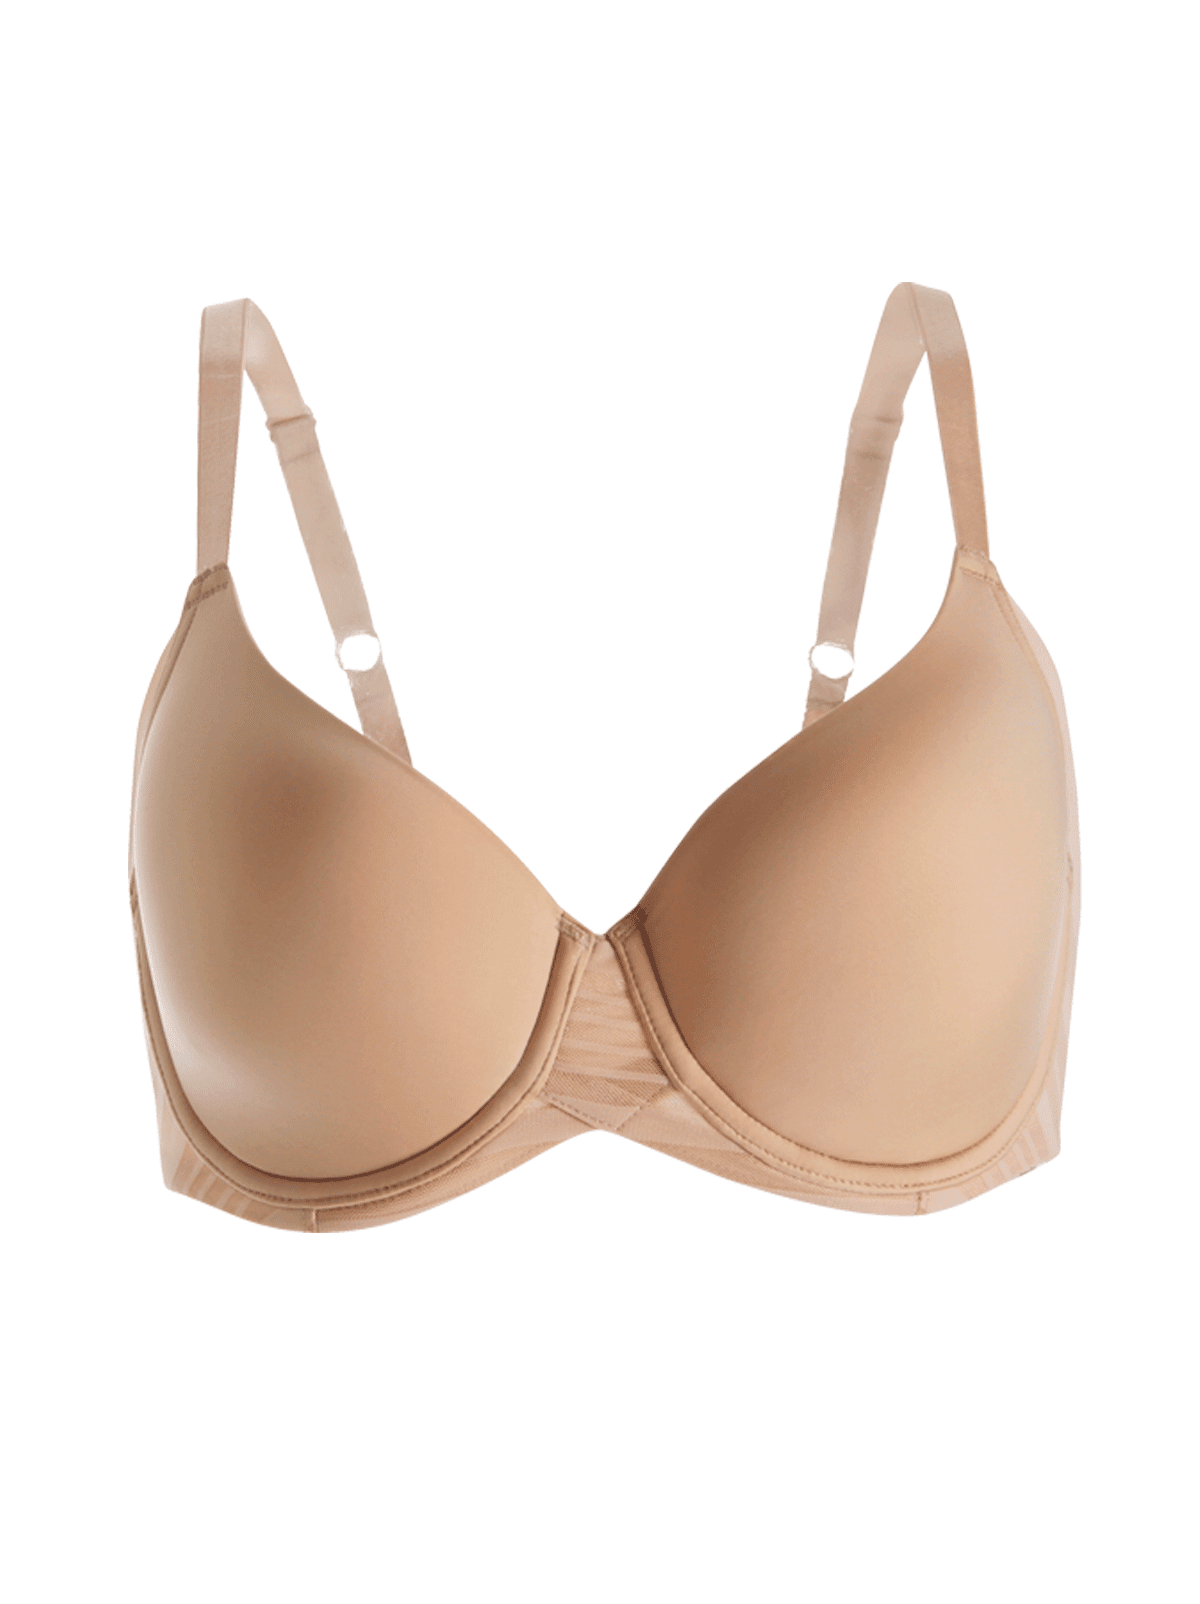 Paramour Women's Marvelous Side Smoother Seamless Bra - Buff Beige 34dd :  Target